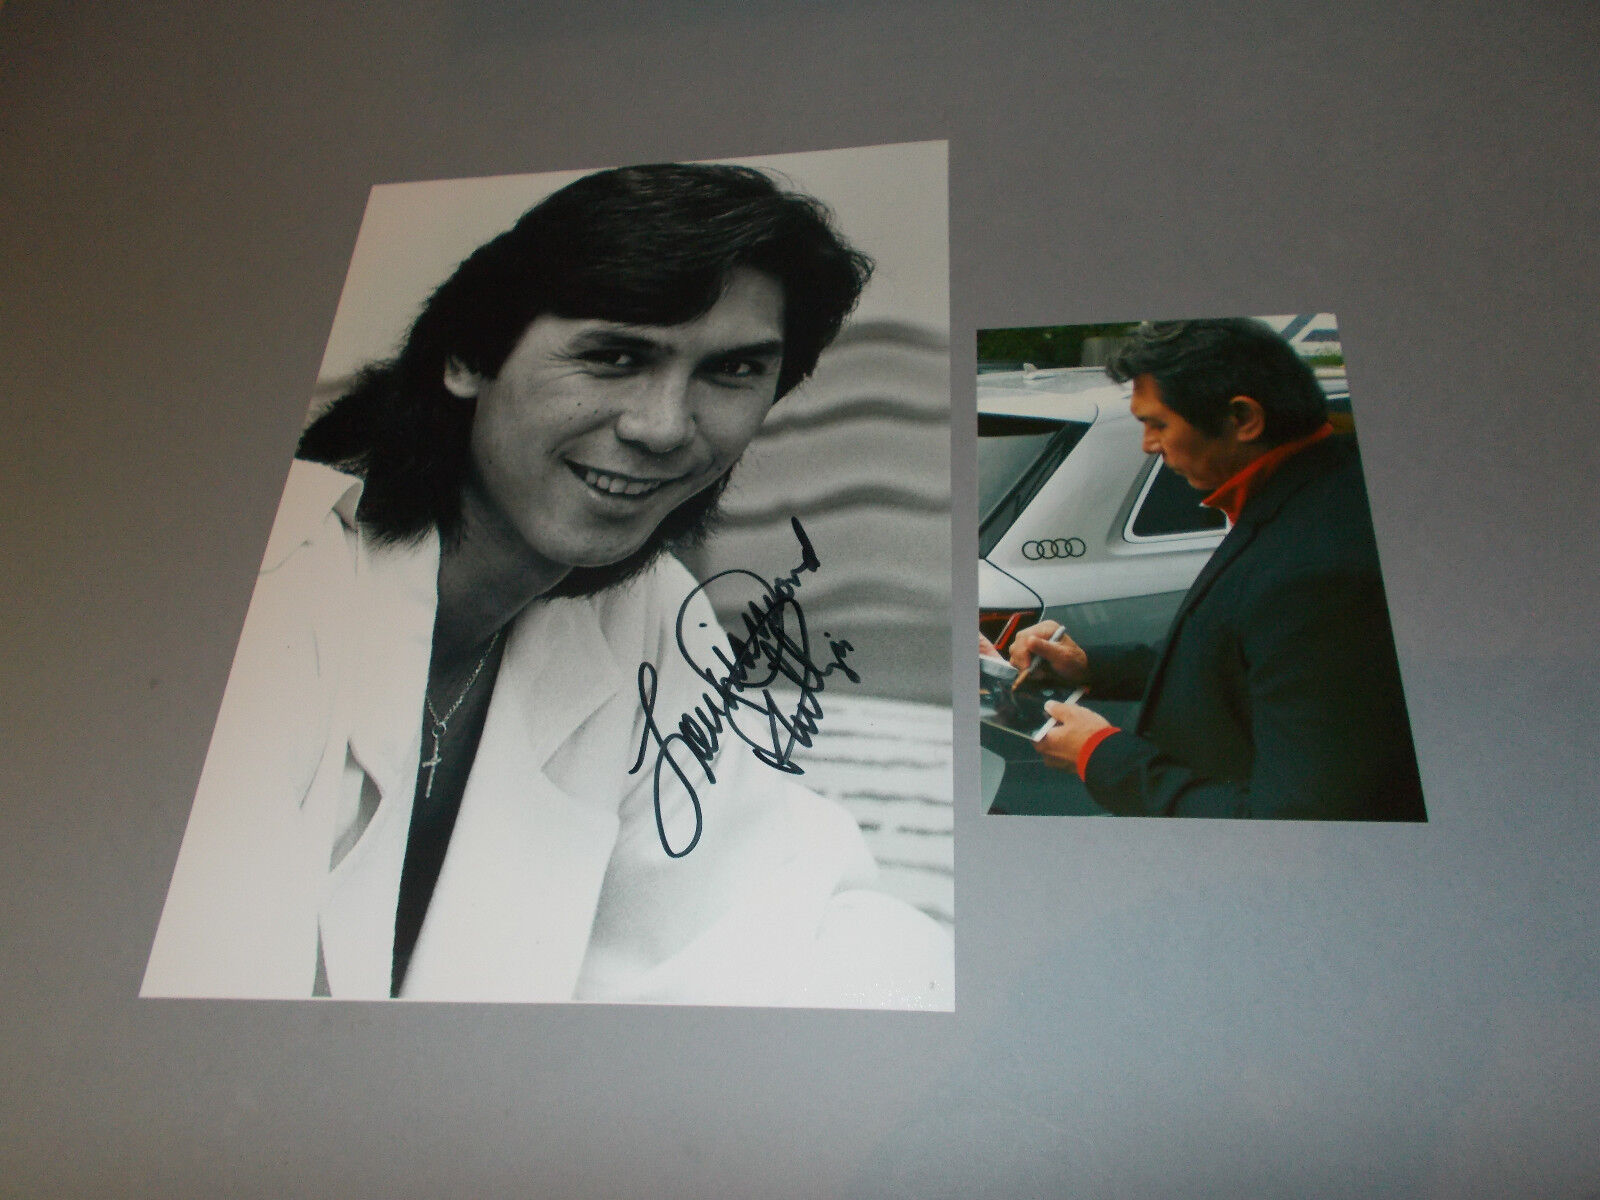 Lou Diamond Phillips Young guns signed autograph Autogramm 8x11 inch photo in p.